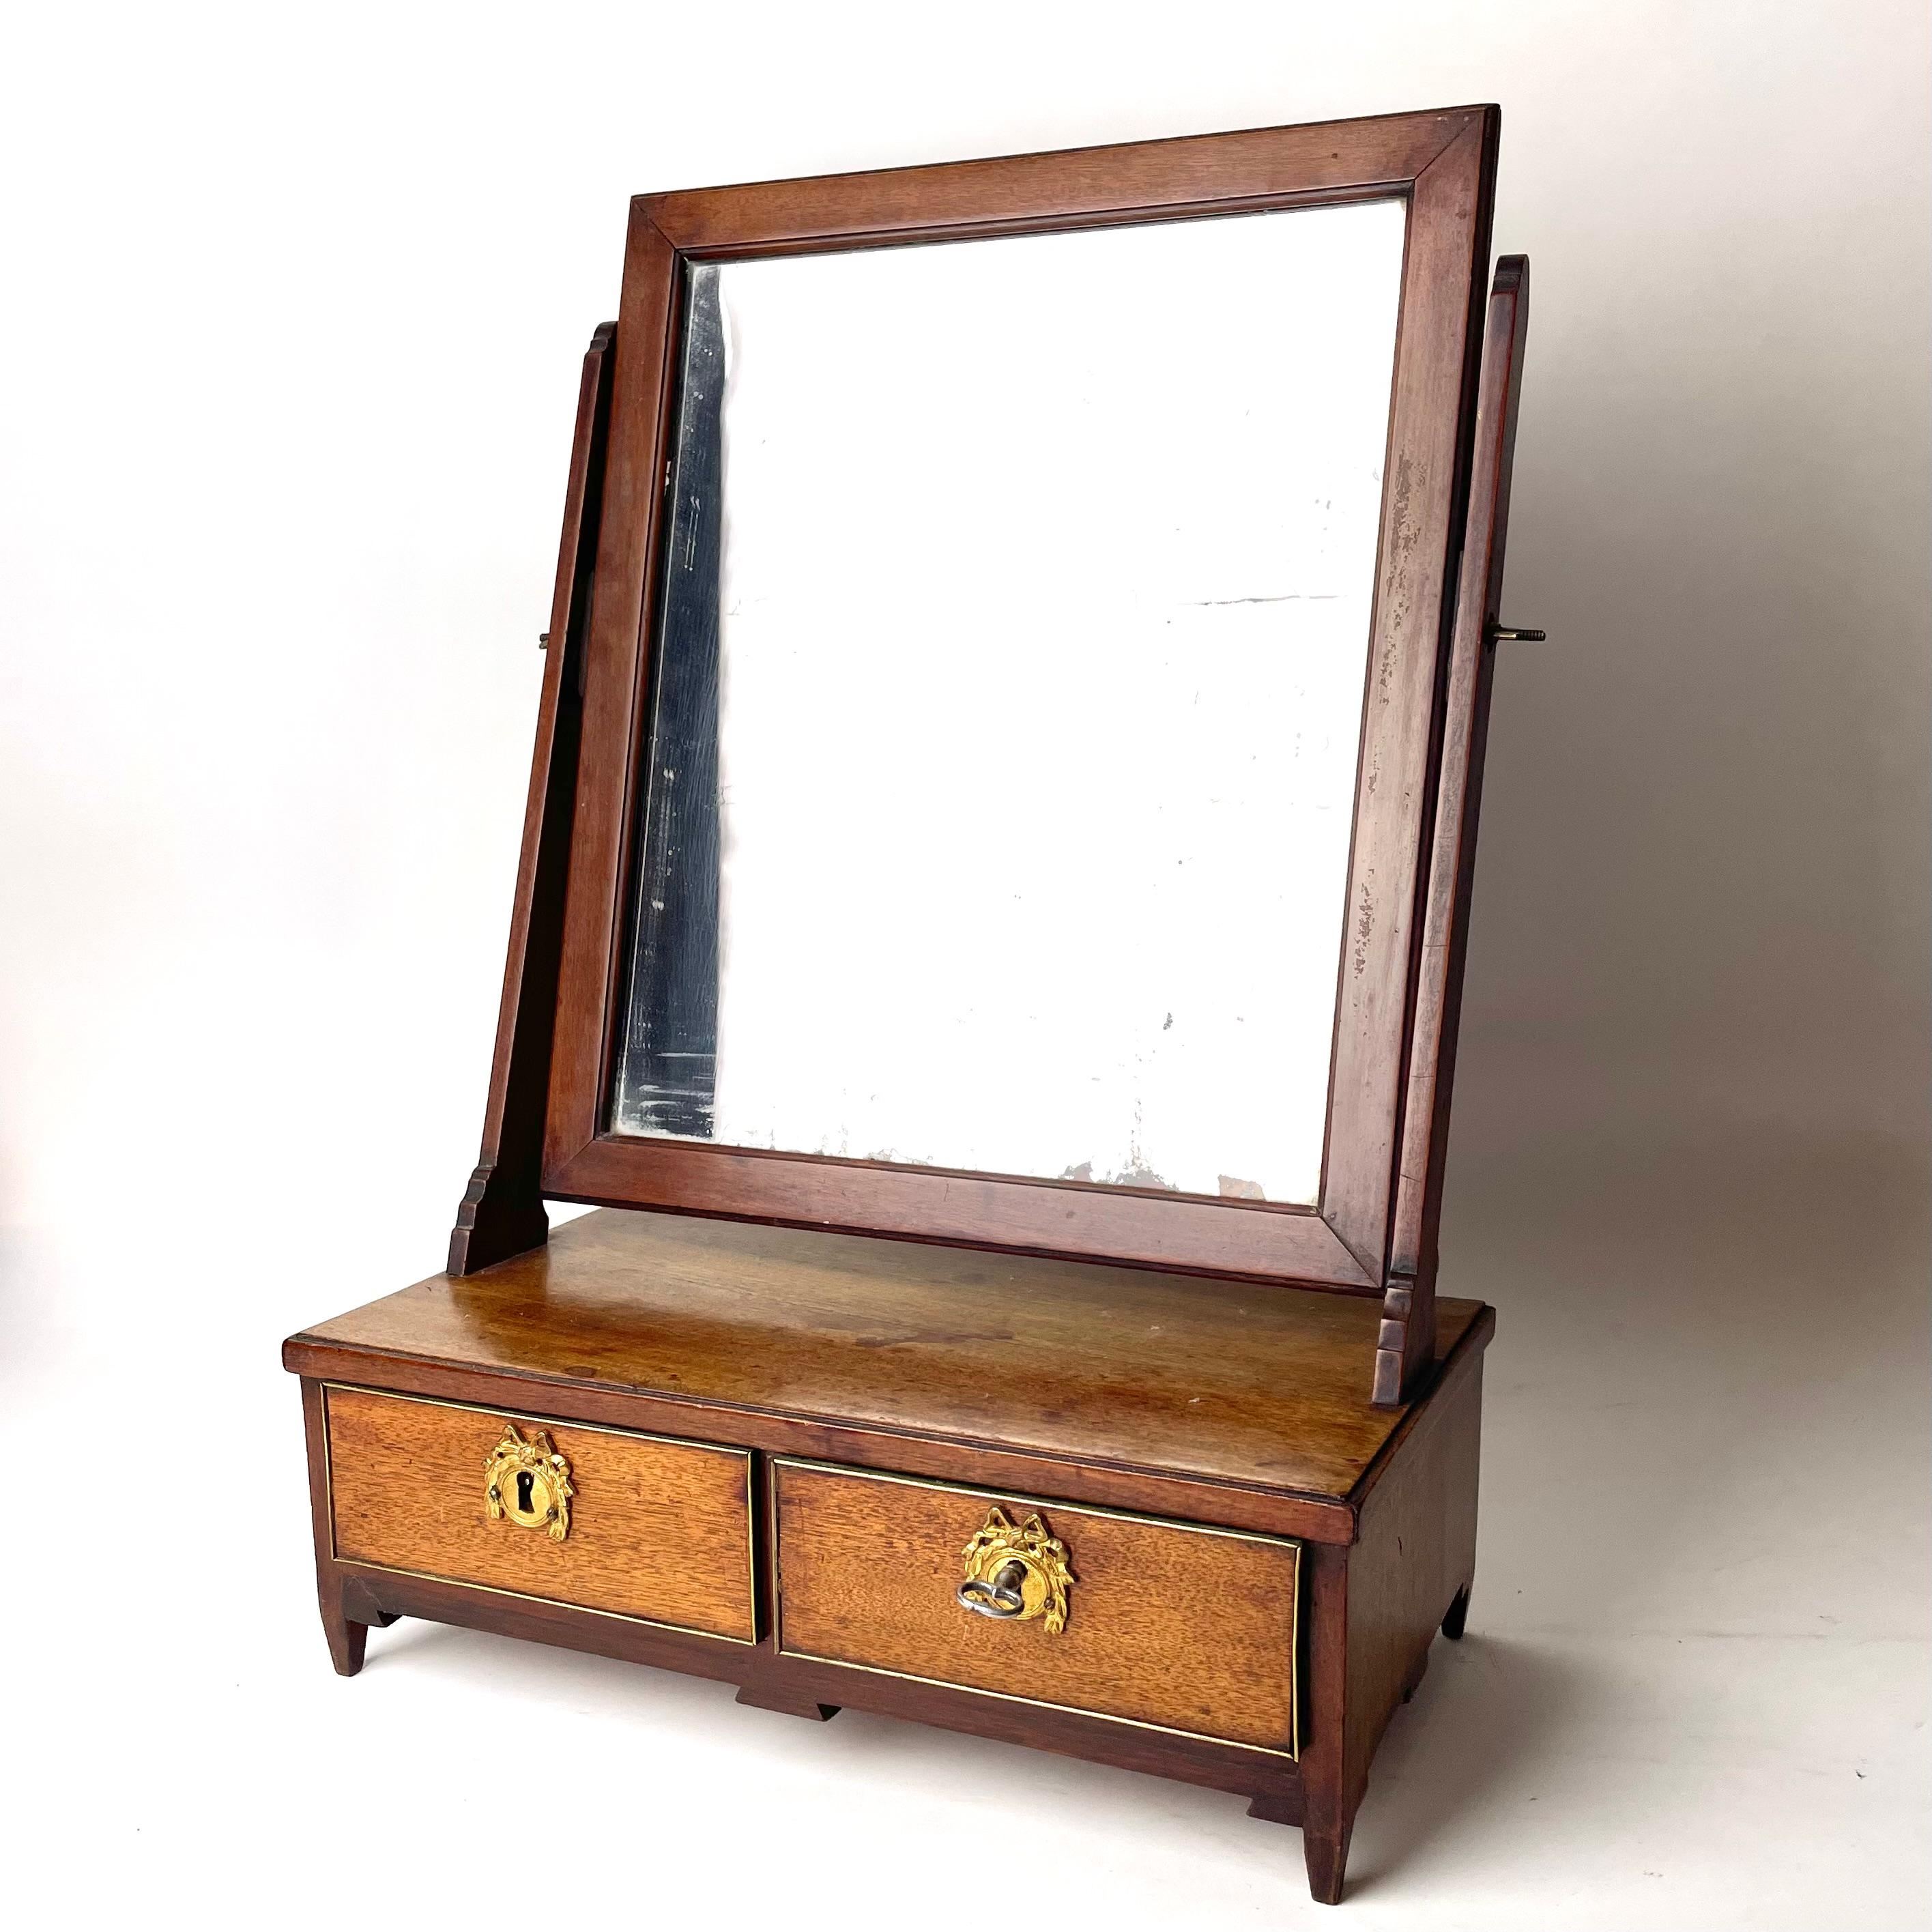 A Gustavian Shaving Mirror in Mahogany & Brass Details. Sweden 1780-1790s.

A beautiful shaving mirror in mahogany (Mahogani Swietania). Made in Sweden during the 1780s-1790s, either during the reign of King Gustav III or his son Gustav  IV. The